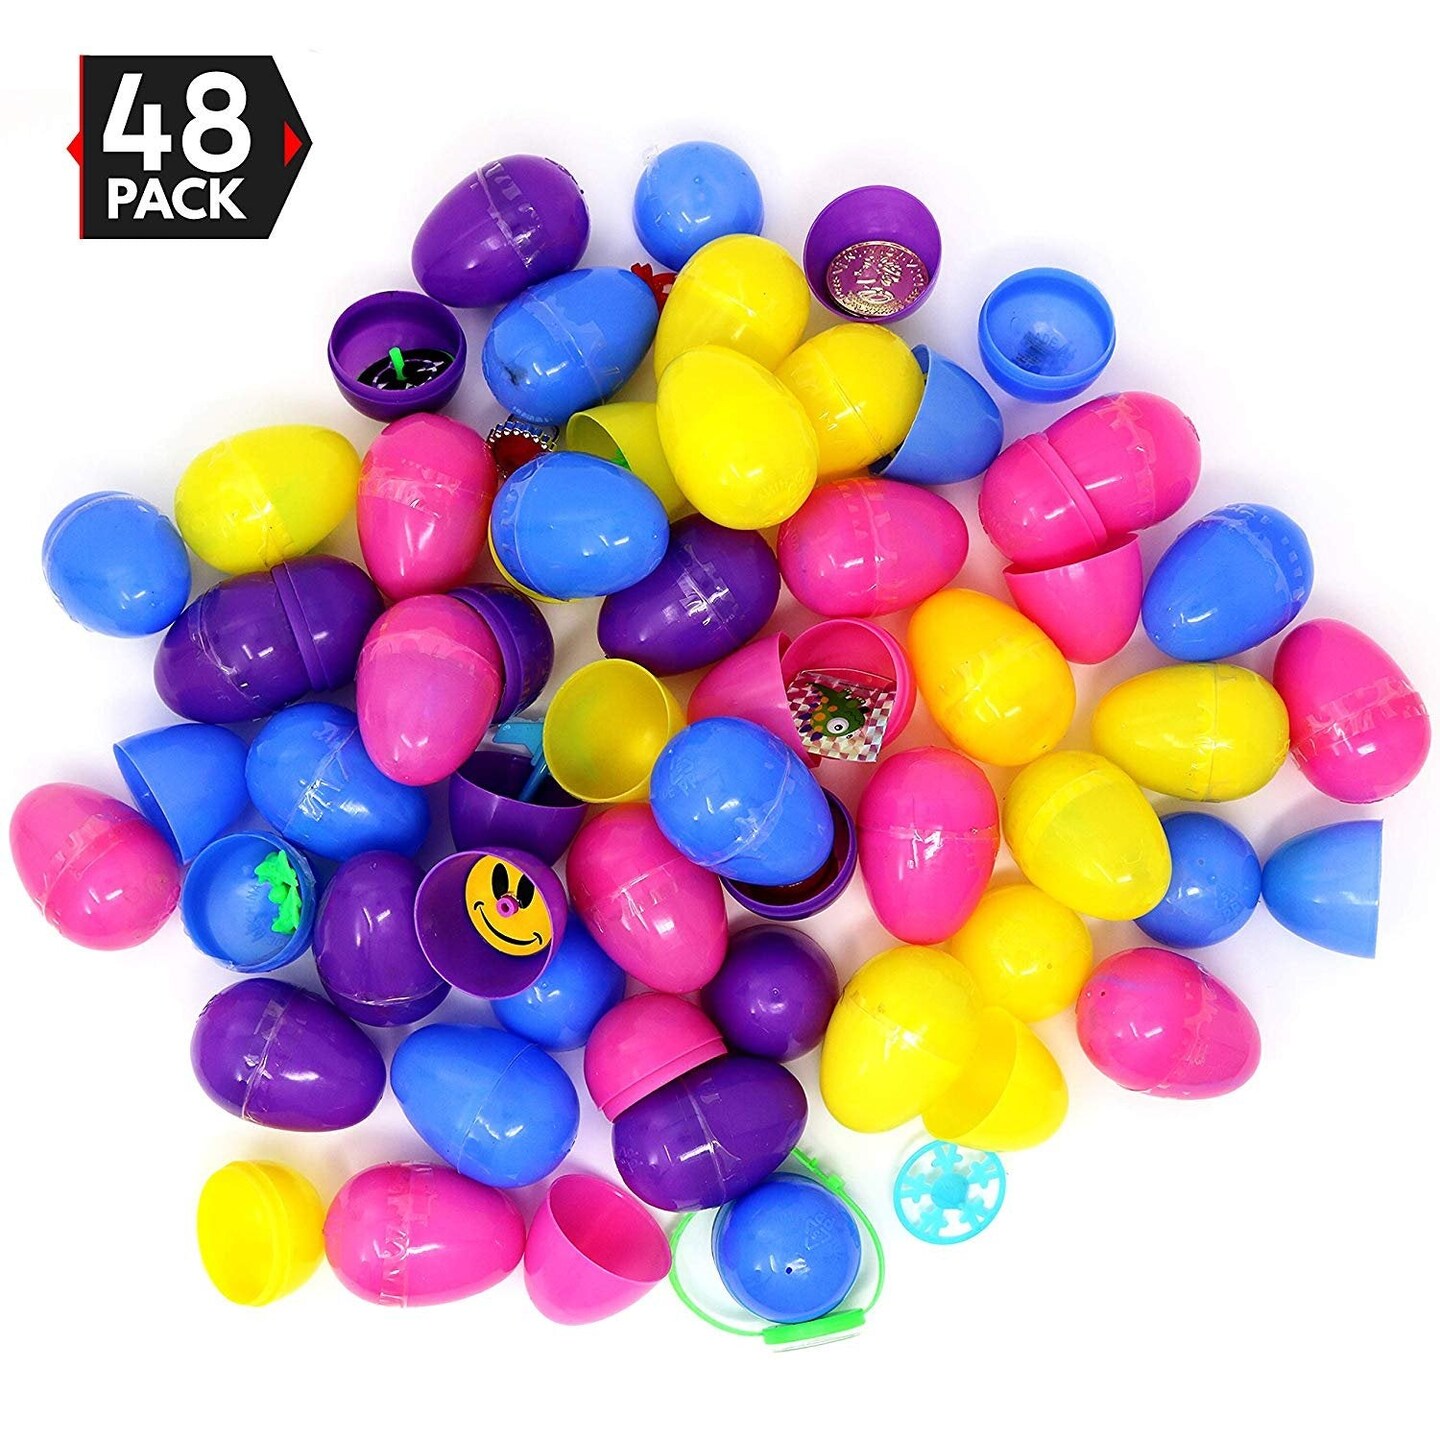 Big Mo&#x27;s Toys Easter Eggs - Prefilled Pastel Colored Plastic Easter Eggs with Toys Inside - 48 Pack